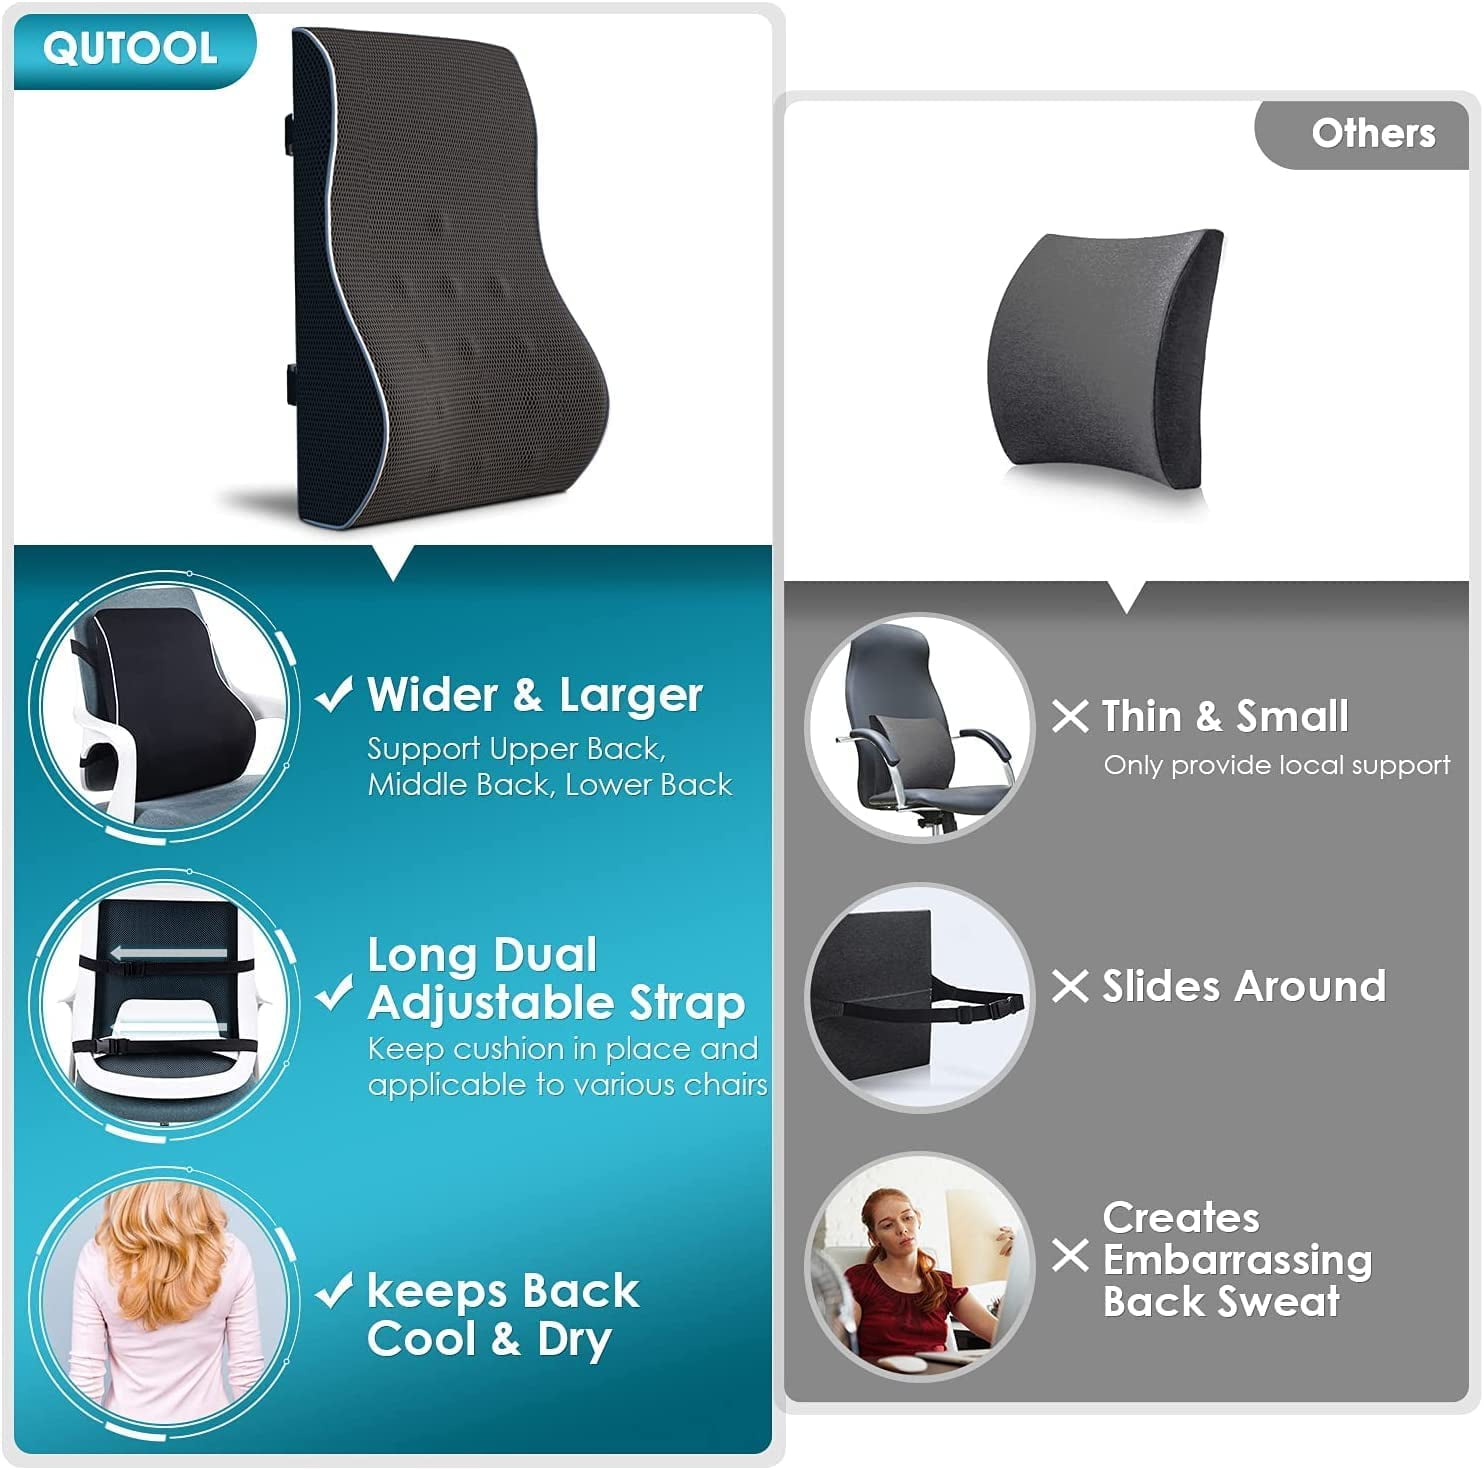 Qutool Orthopedic Memory Foam Seat Cushion and Lumbar Support Back Pillow  for Lower Back Tailbone and Sciatica Relief Office Chair Gaming Chair and Car  Seat Cus…